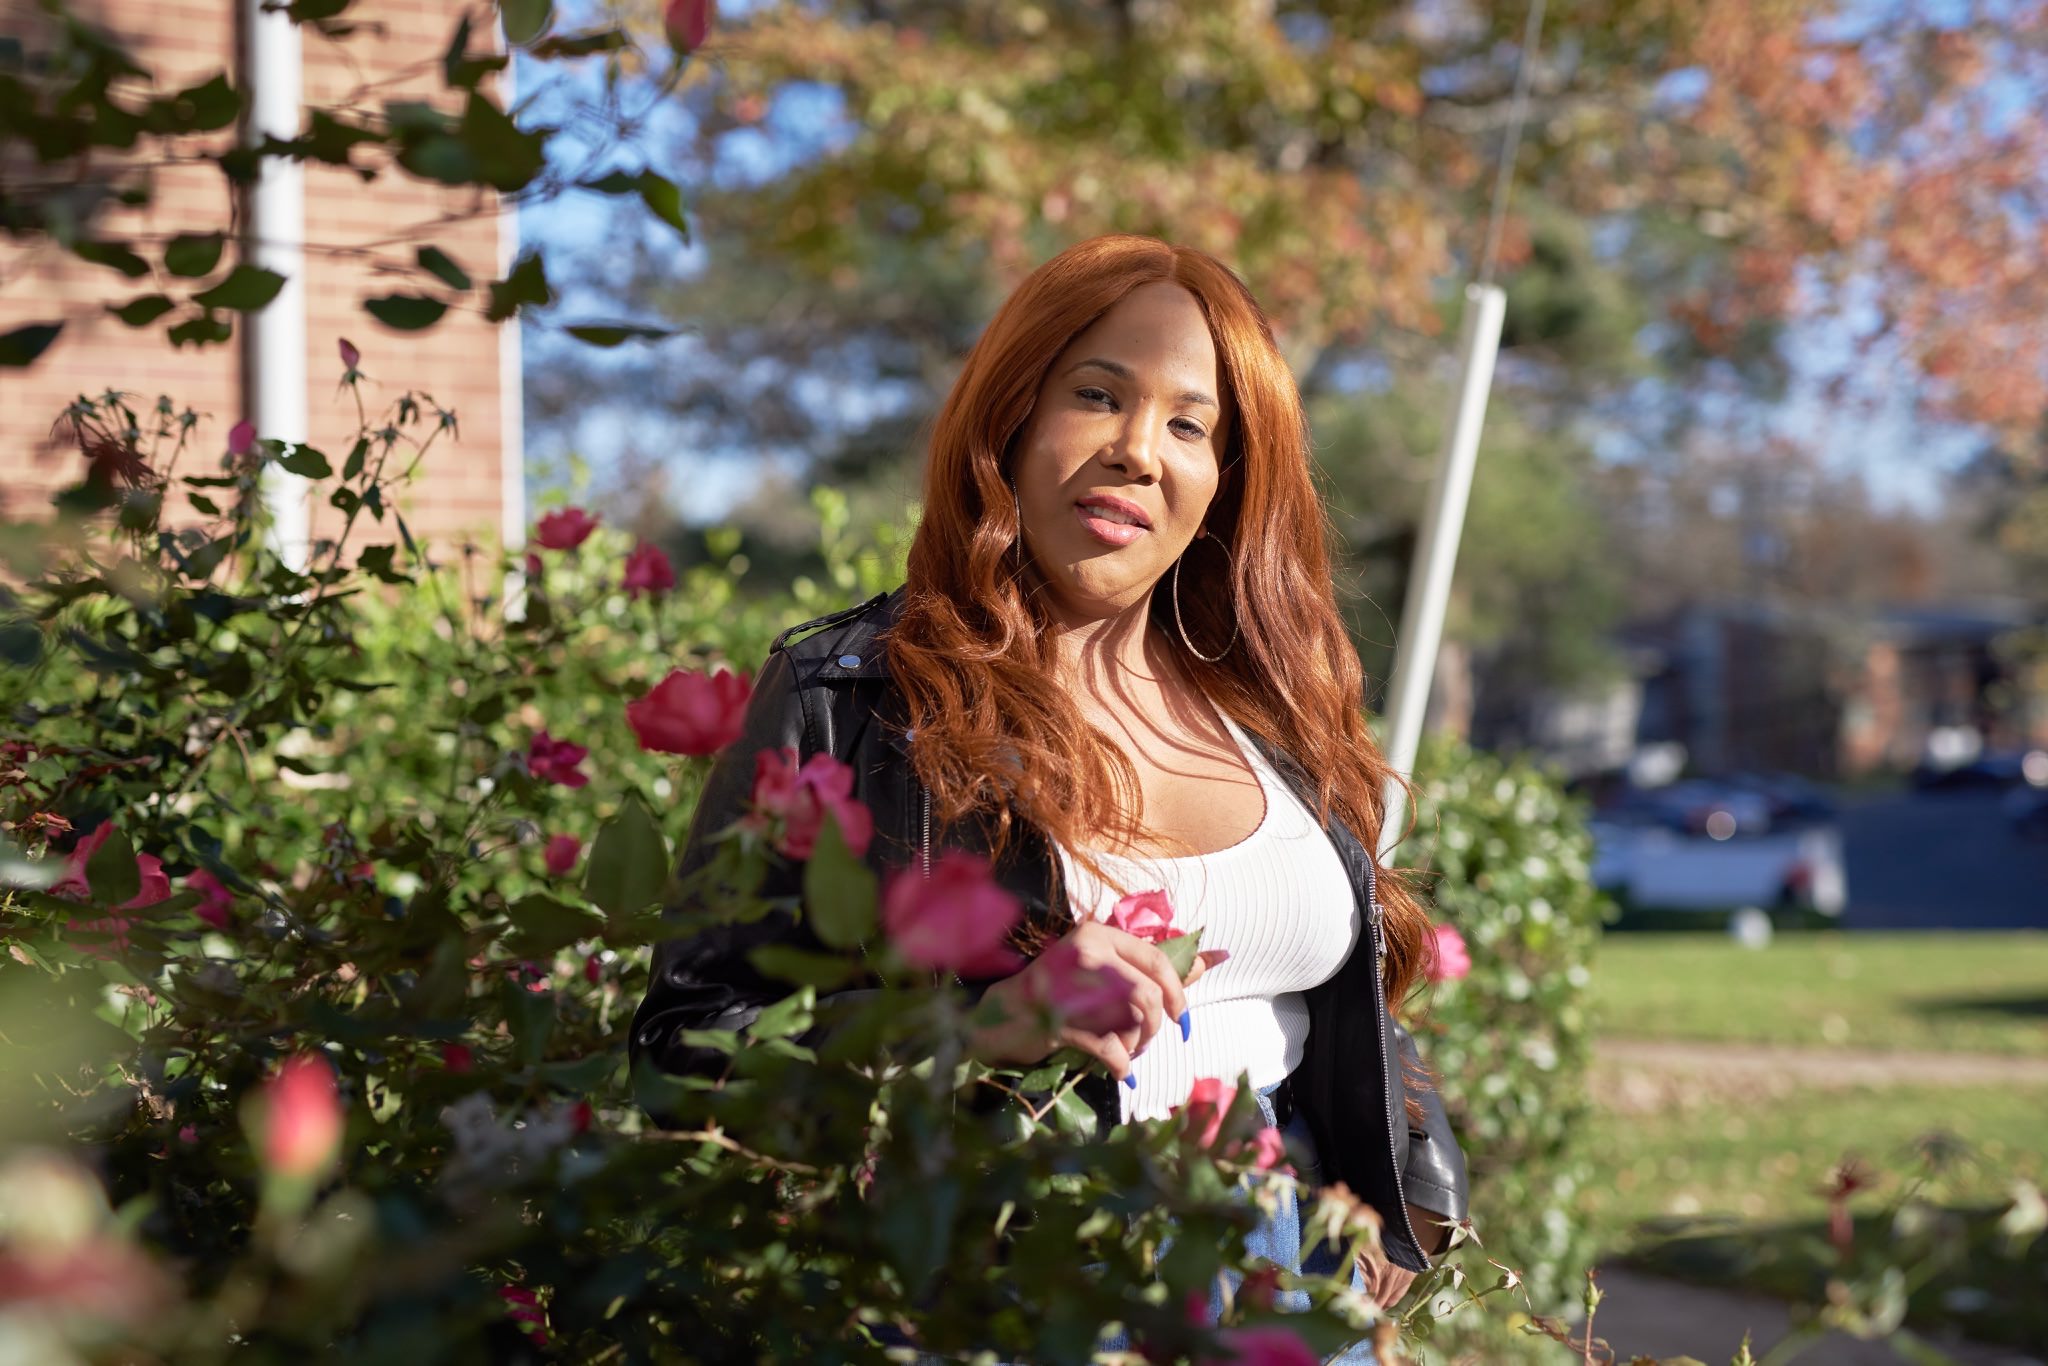 Black trans woman wearing a leather jacket standing in a garden with flowers